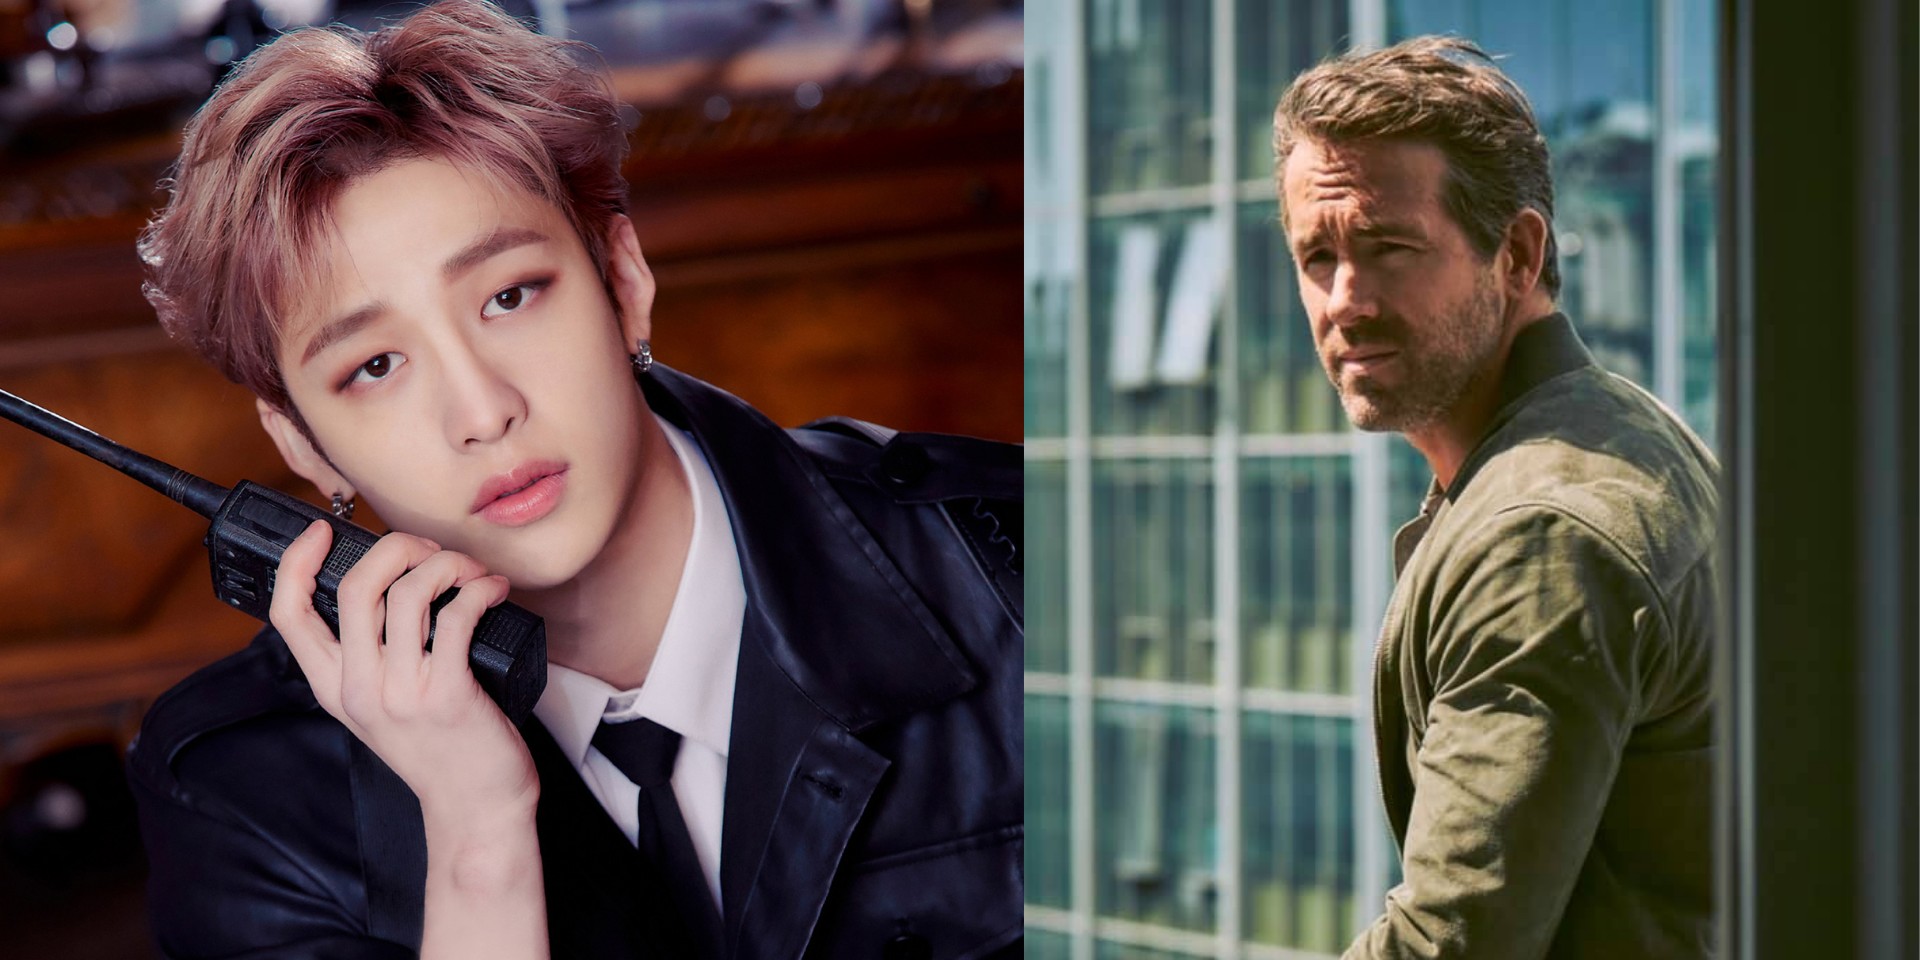 Ryan Reynolds talks to Bang Chan about 'Free Guy' and Stray Kids' upcoming 'NOEASY' album: "I think you’re all amazing, I’m such a huge fan"